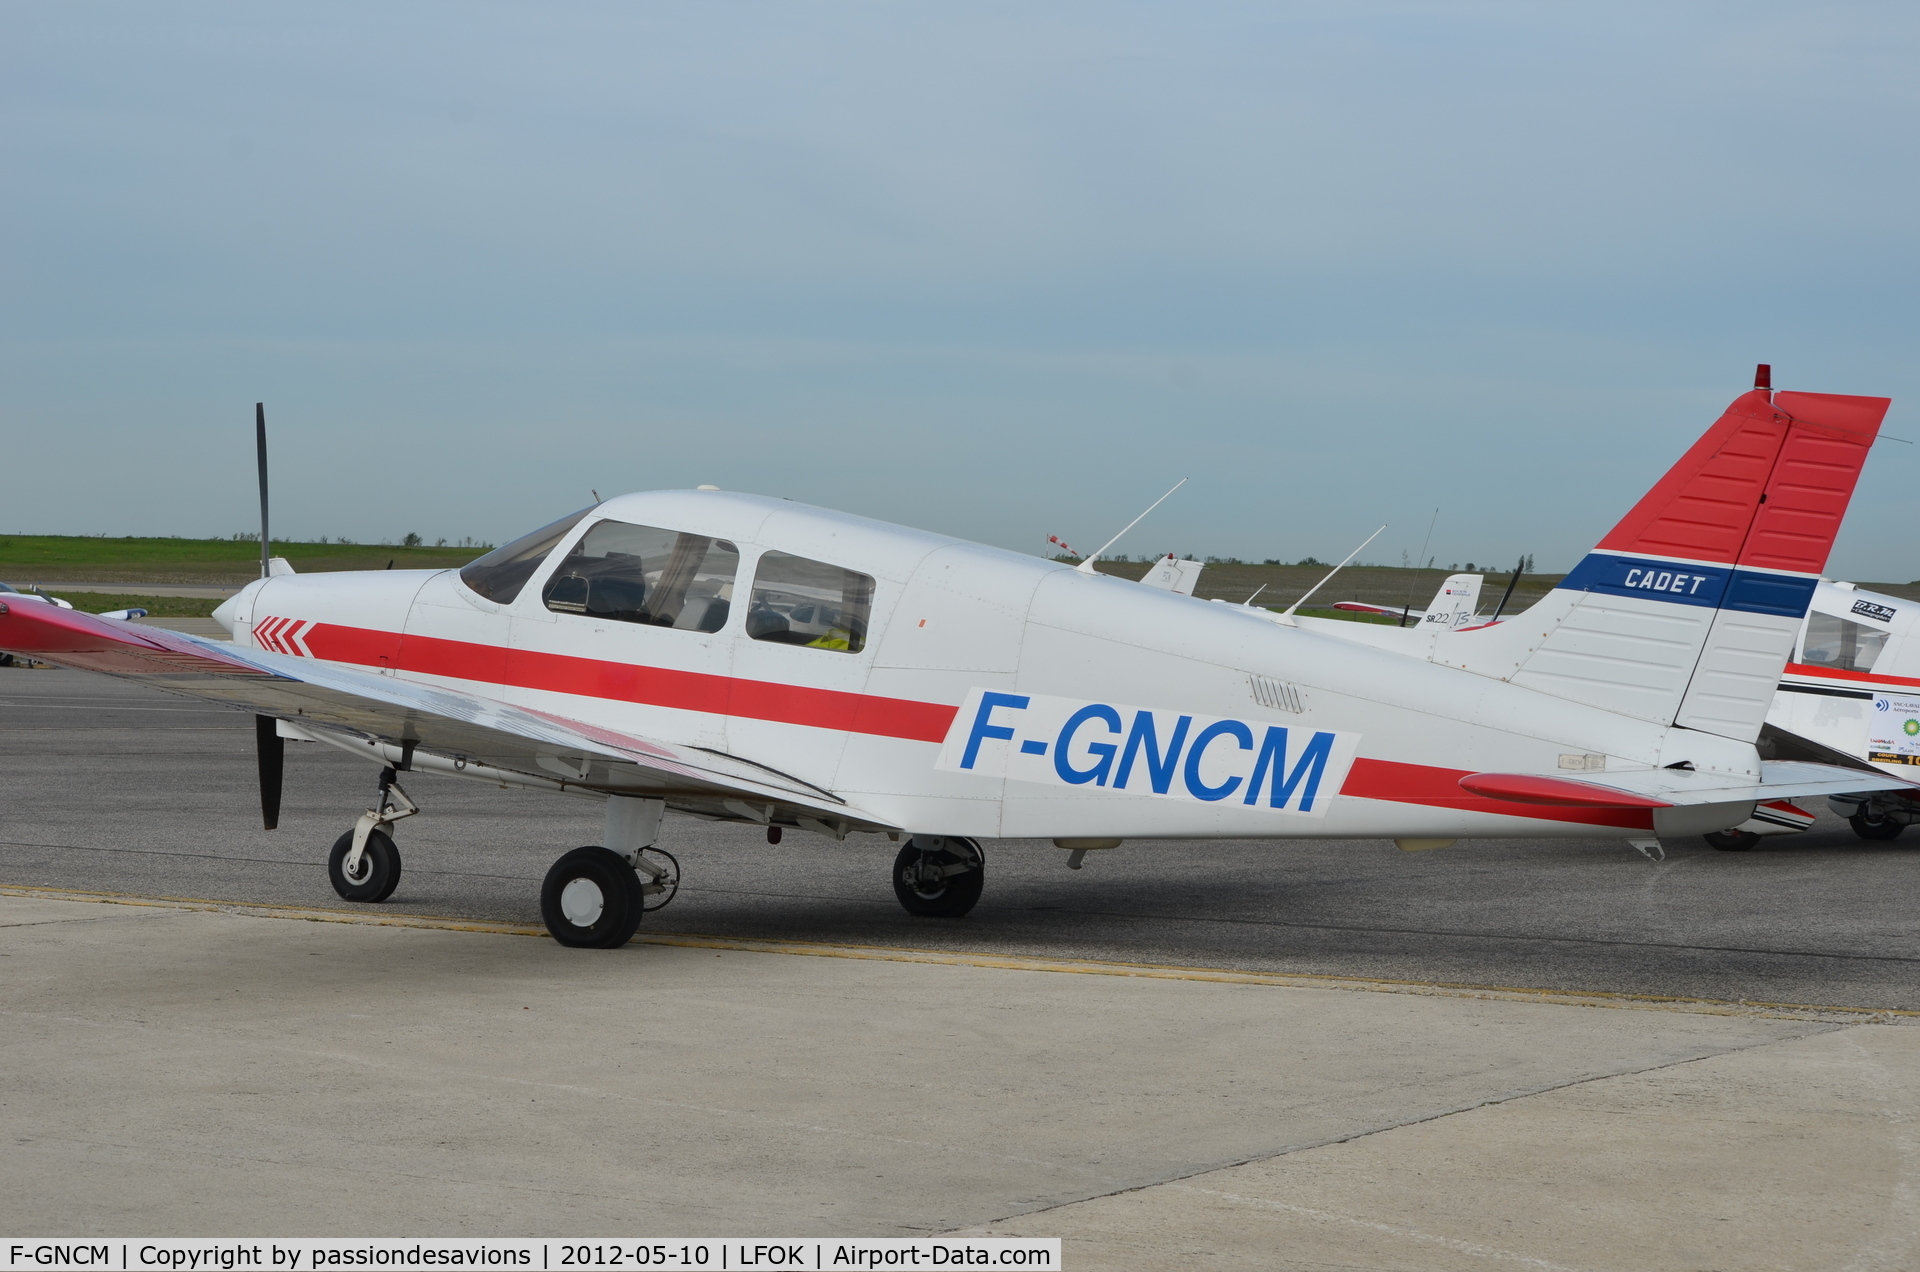 F-GNCM, Piper PA-28-161 Cadet C/N 28-41292, on the apron